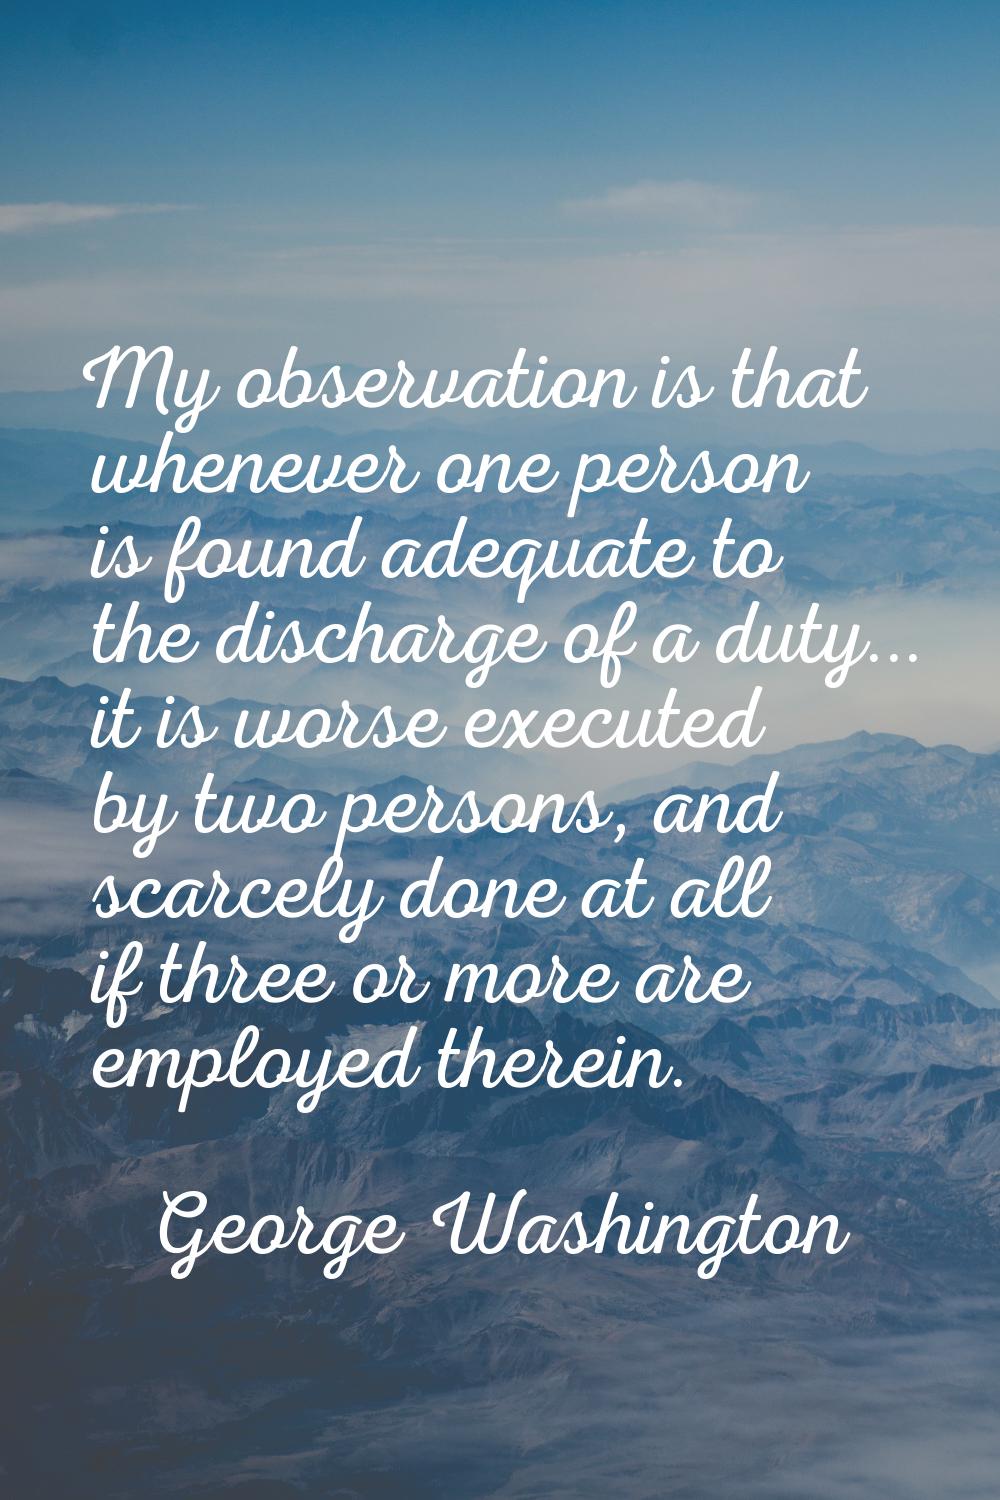 My observation is that whenever one person is found adequate to the discharge of a duty... it is wo